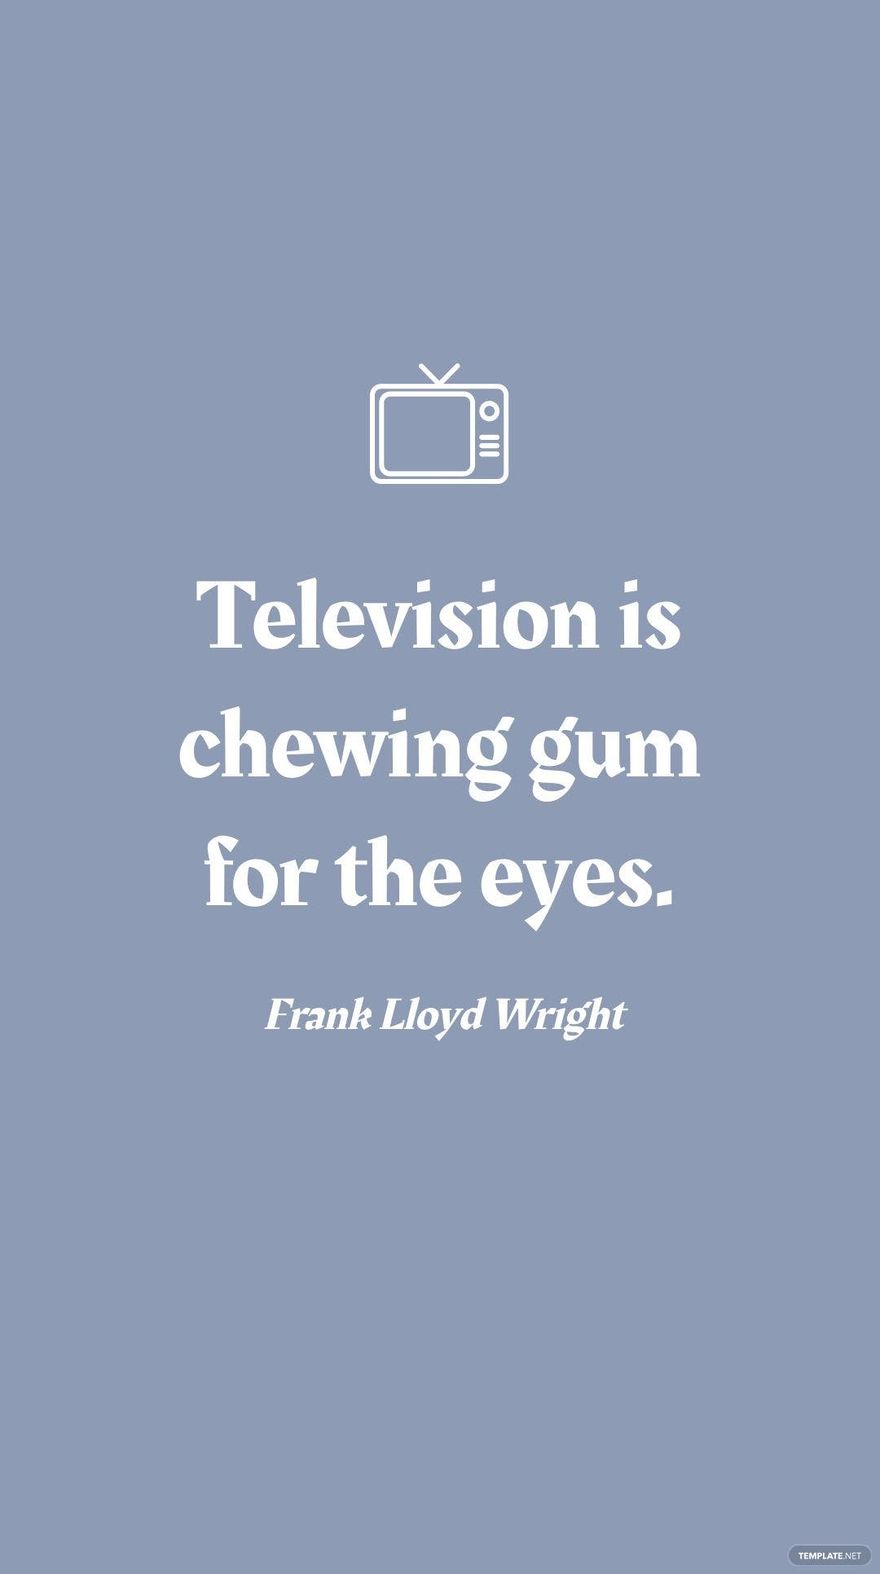 Frank Lloyd Wright - Television is chewing gum for the eyes.